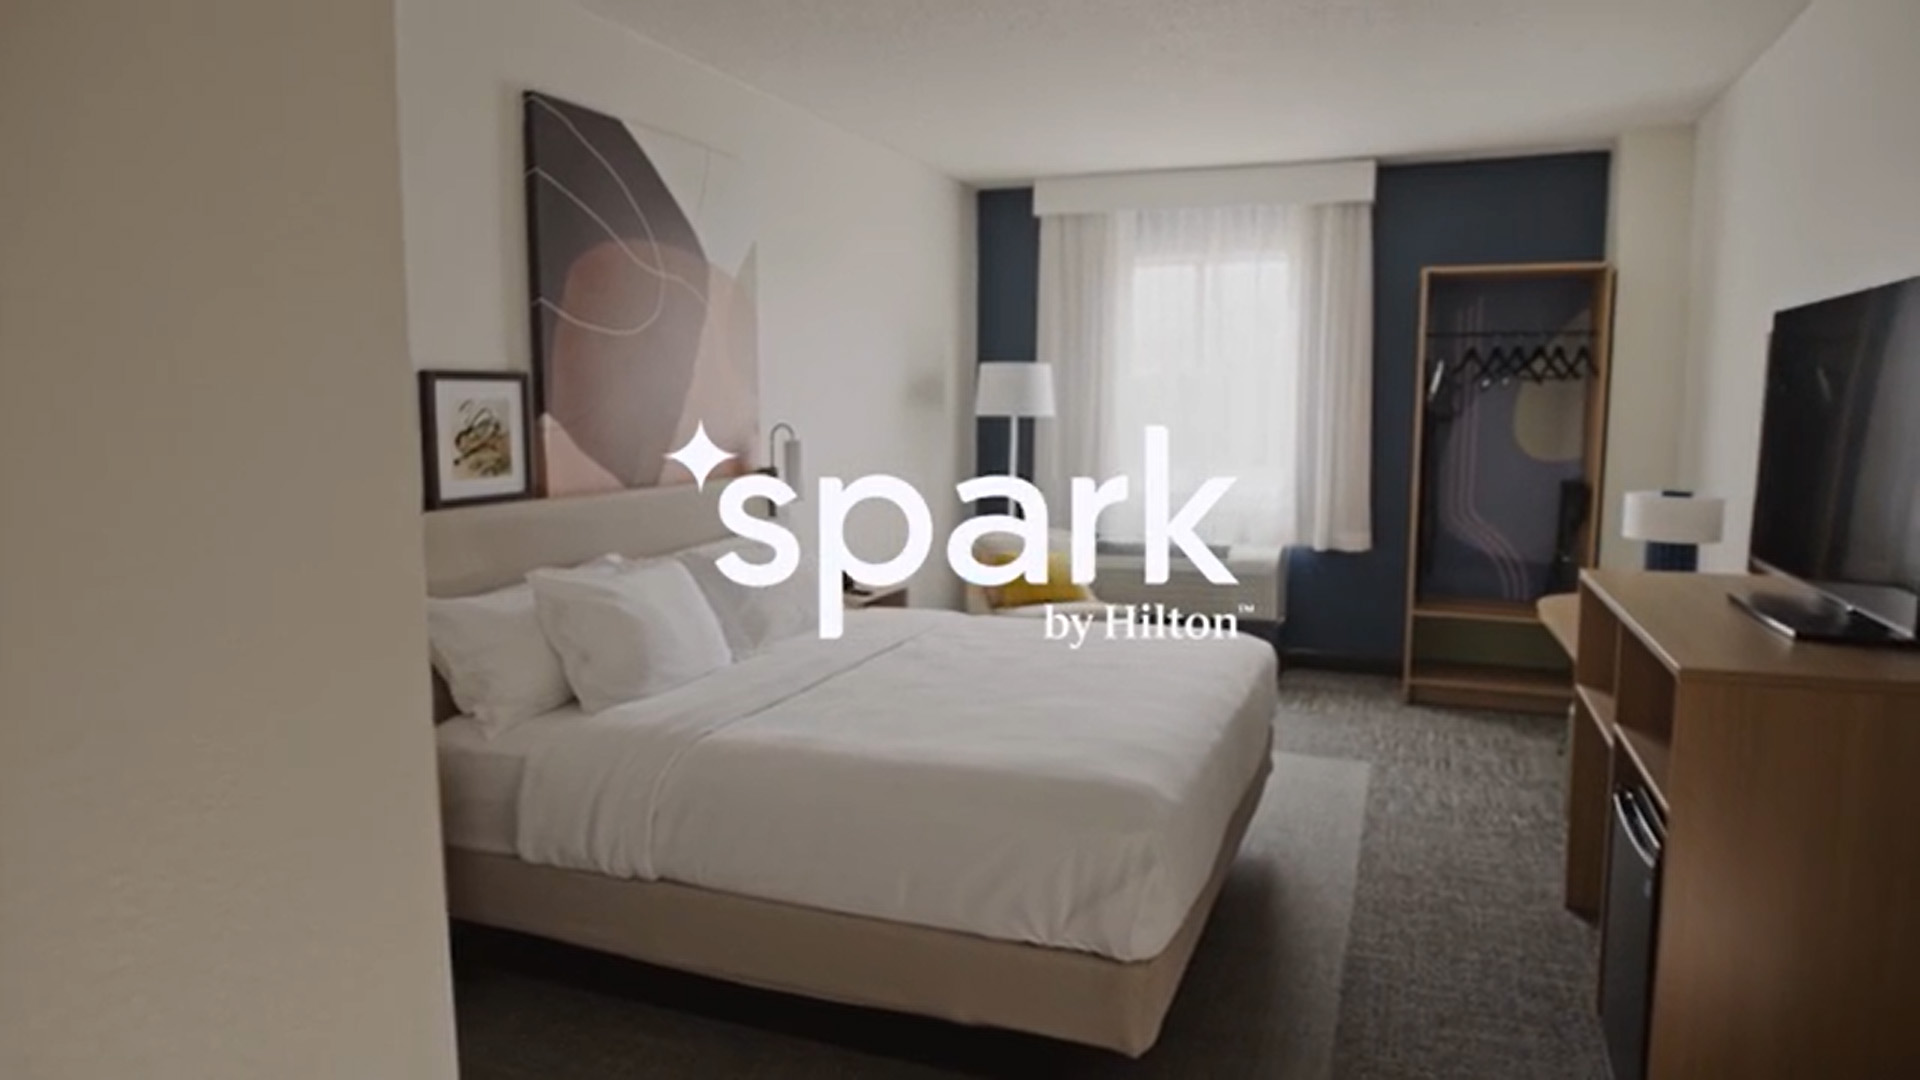 Play Video: Welcome to Spark by Hilton